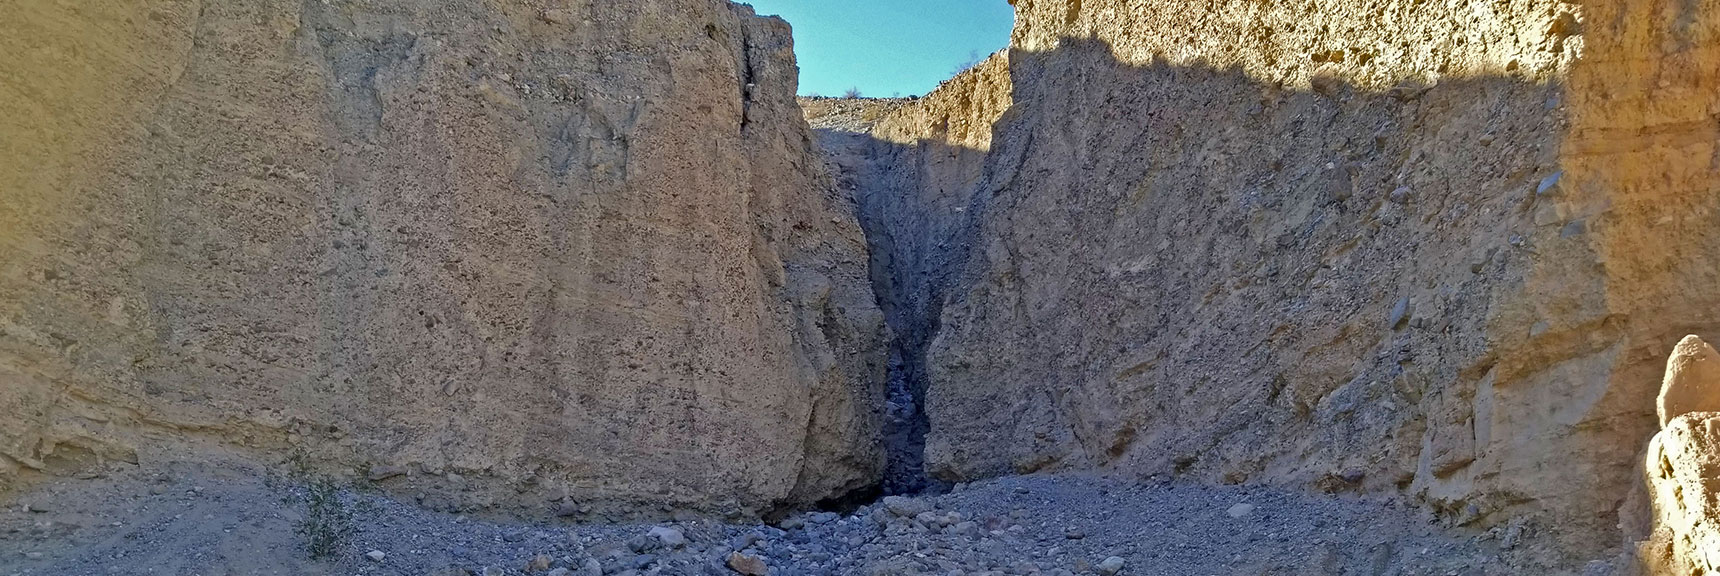 First Unofficial Side Slot Canyon Entrance | Sidewinder Canyon | Death Valley National Park, California